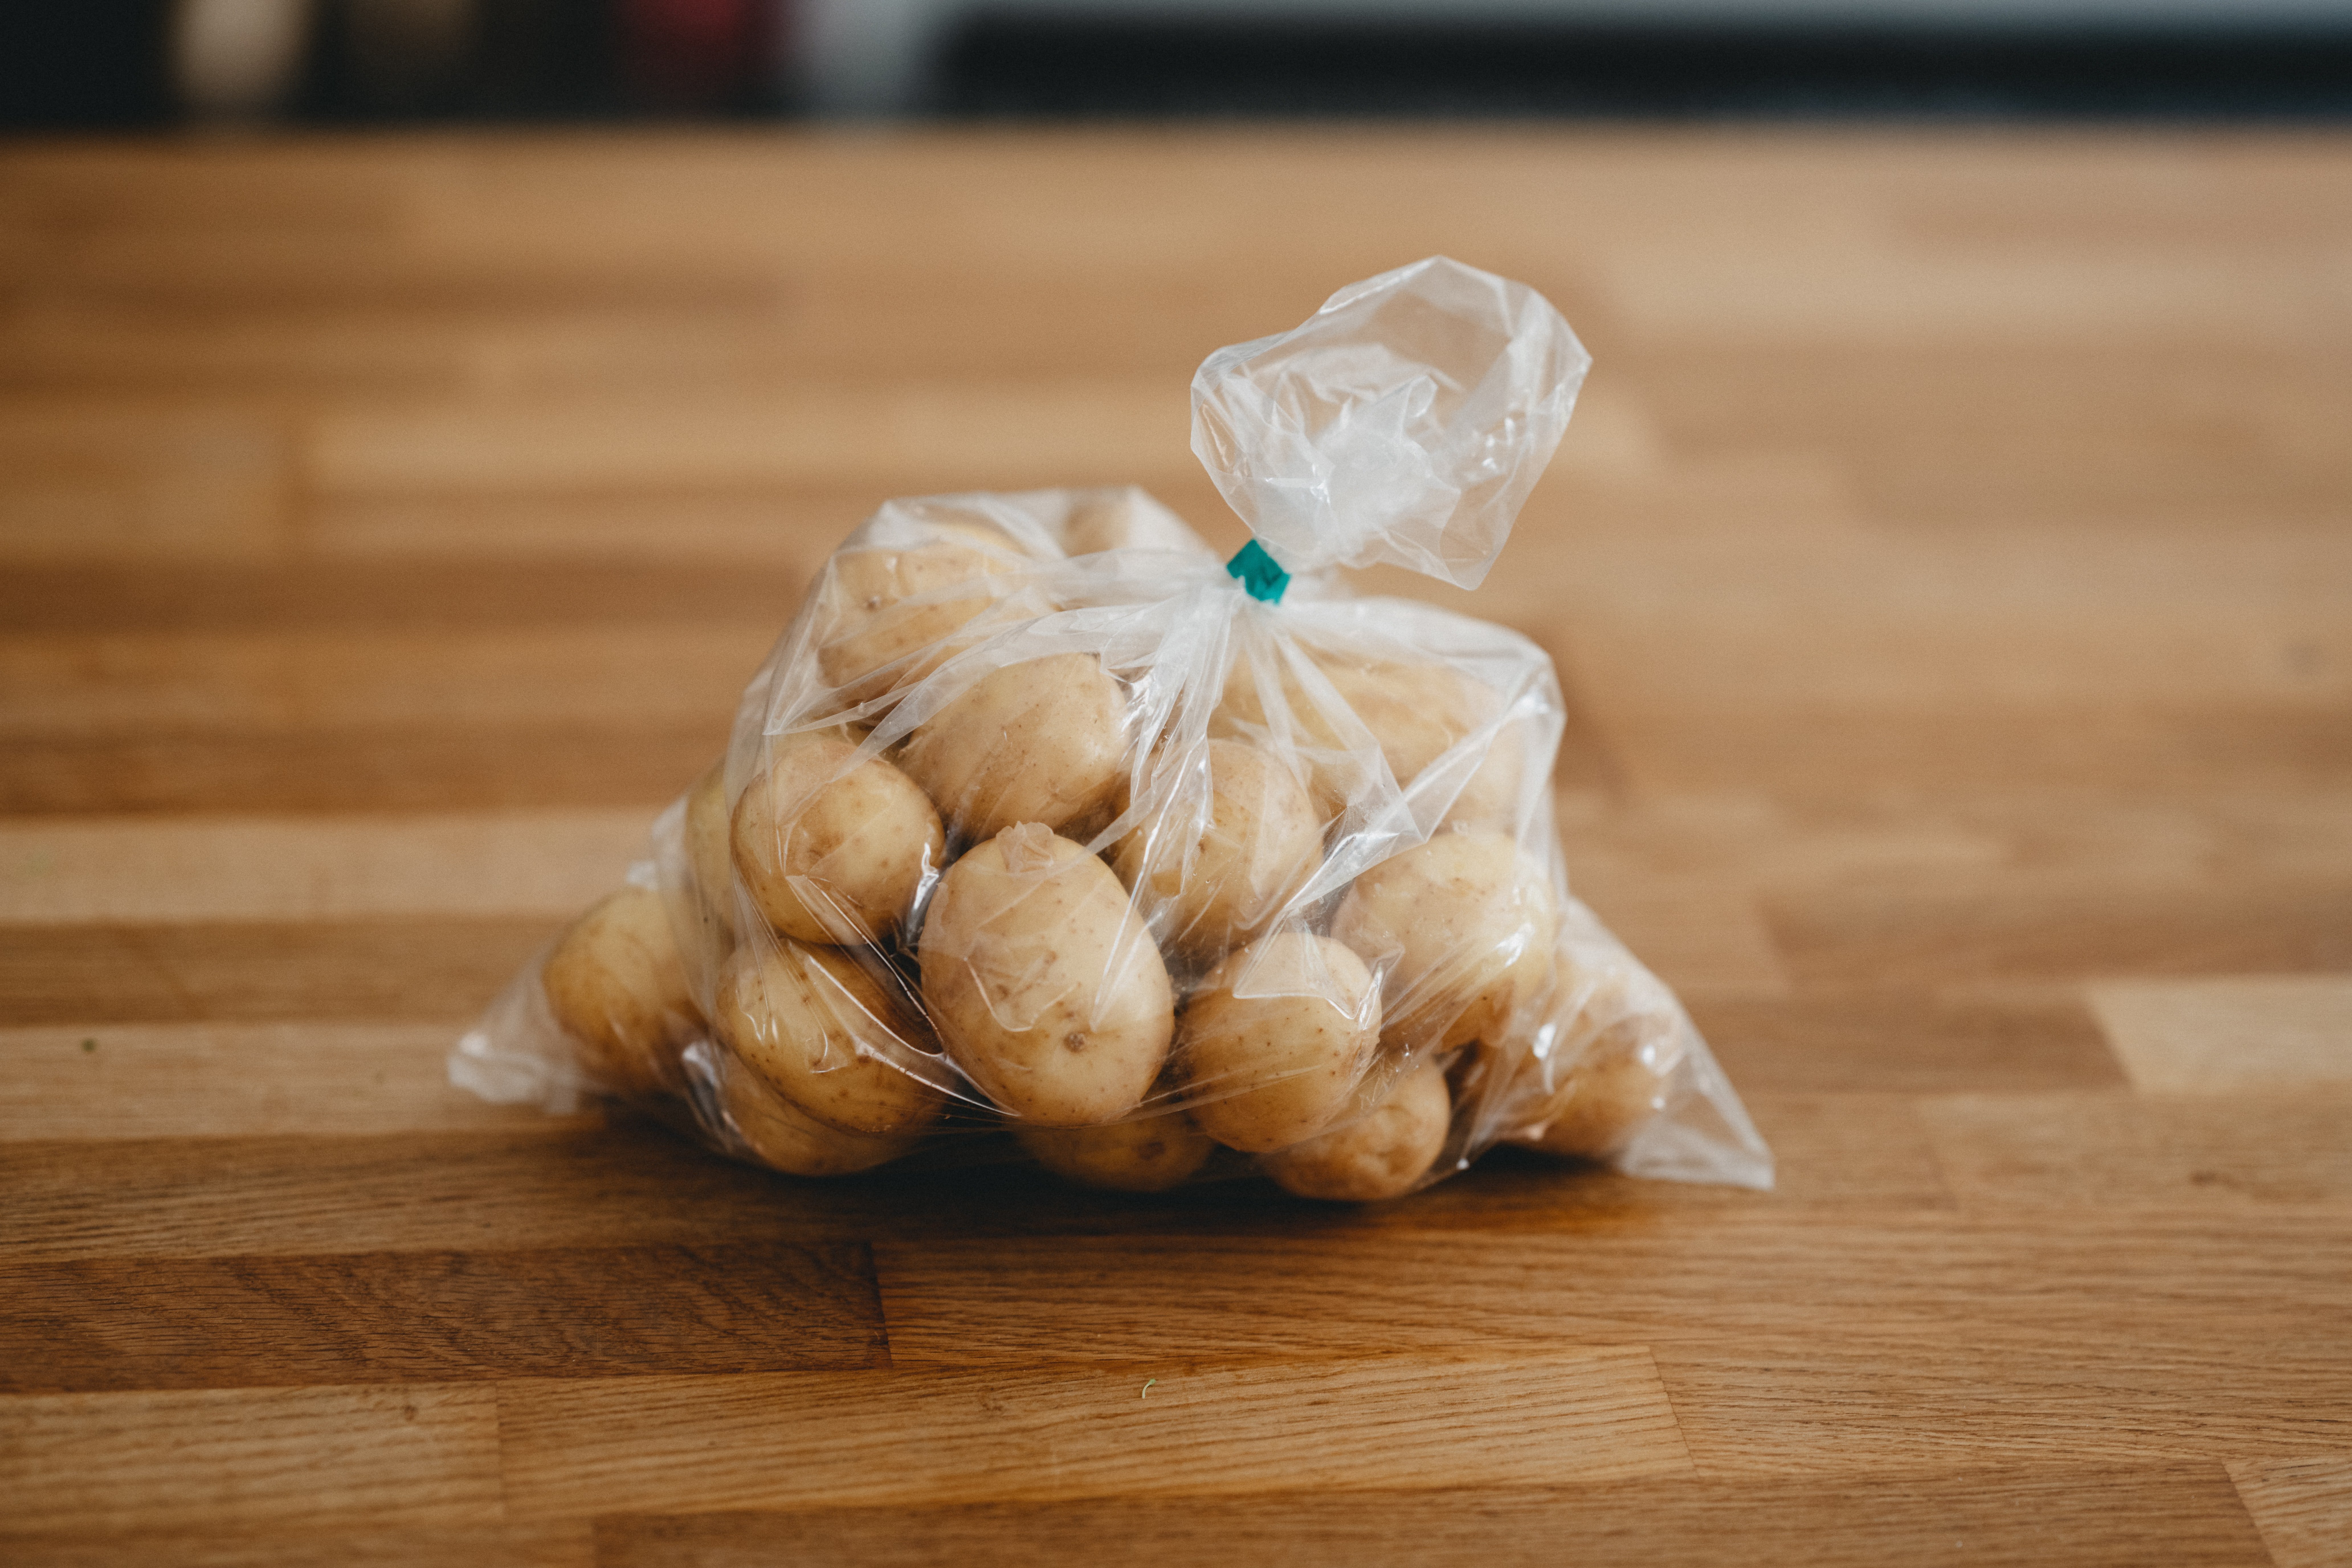 Tom offered a bag of potatoes to the older man | Photo: Unsplash